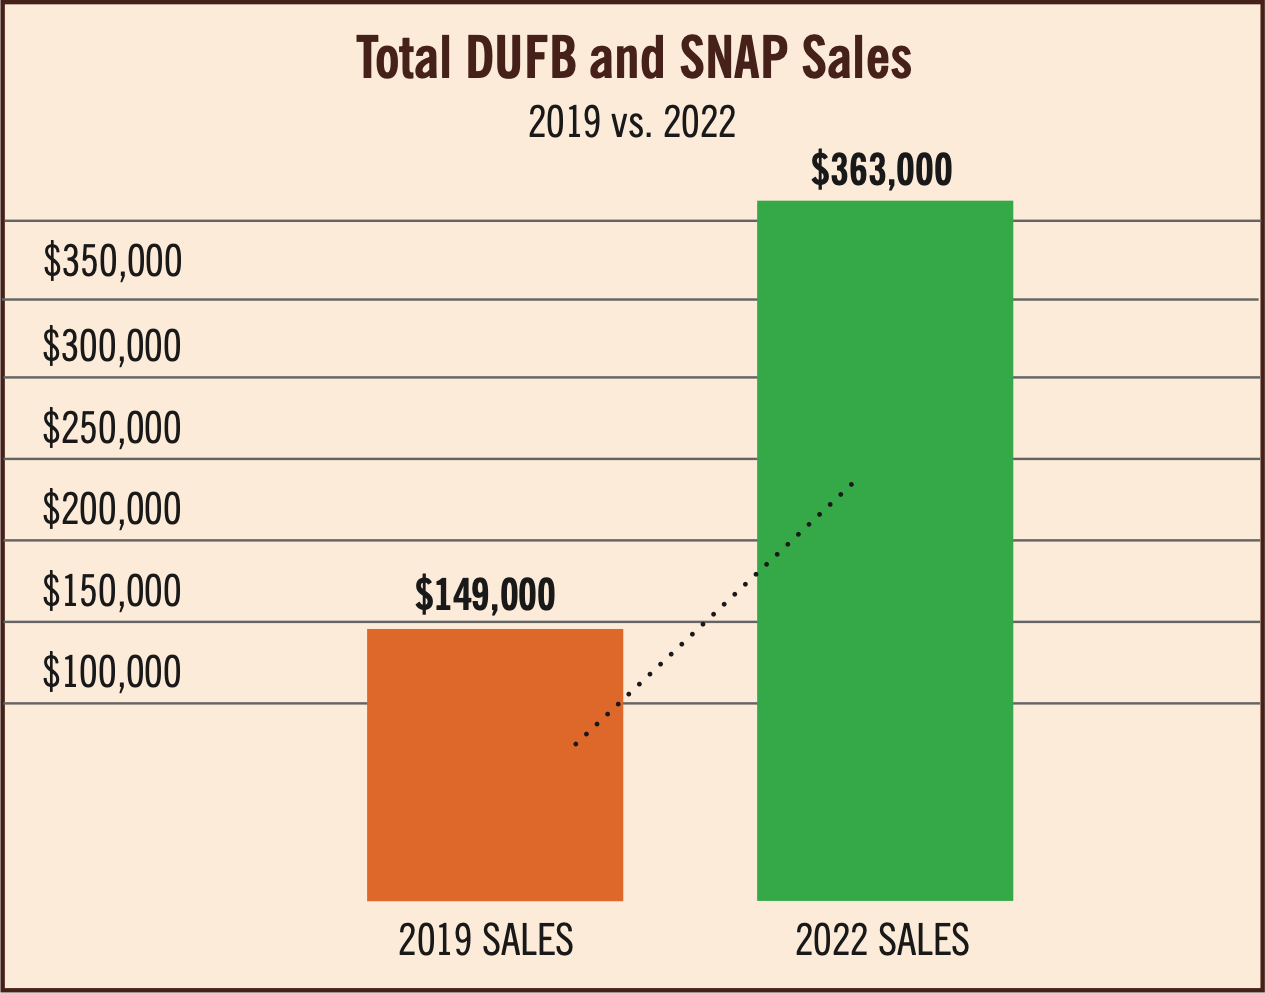 Graph showing $363,000 in SNAP sales for 2022 vs. $149,000 for 2020.